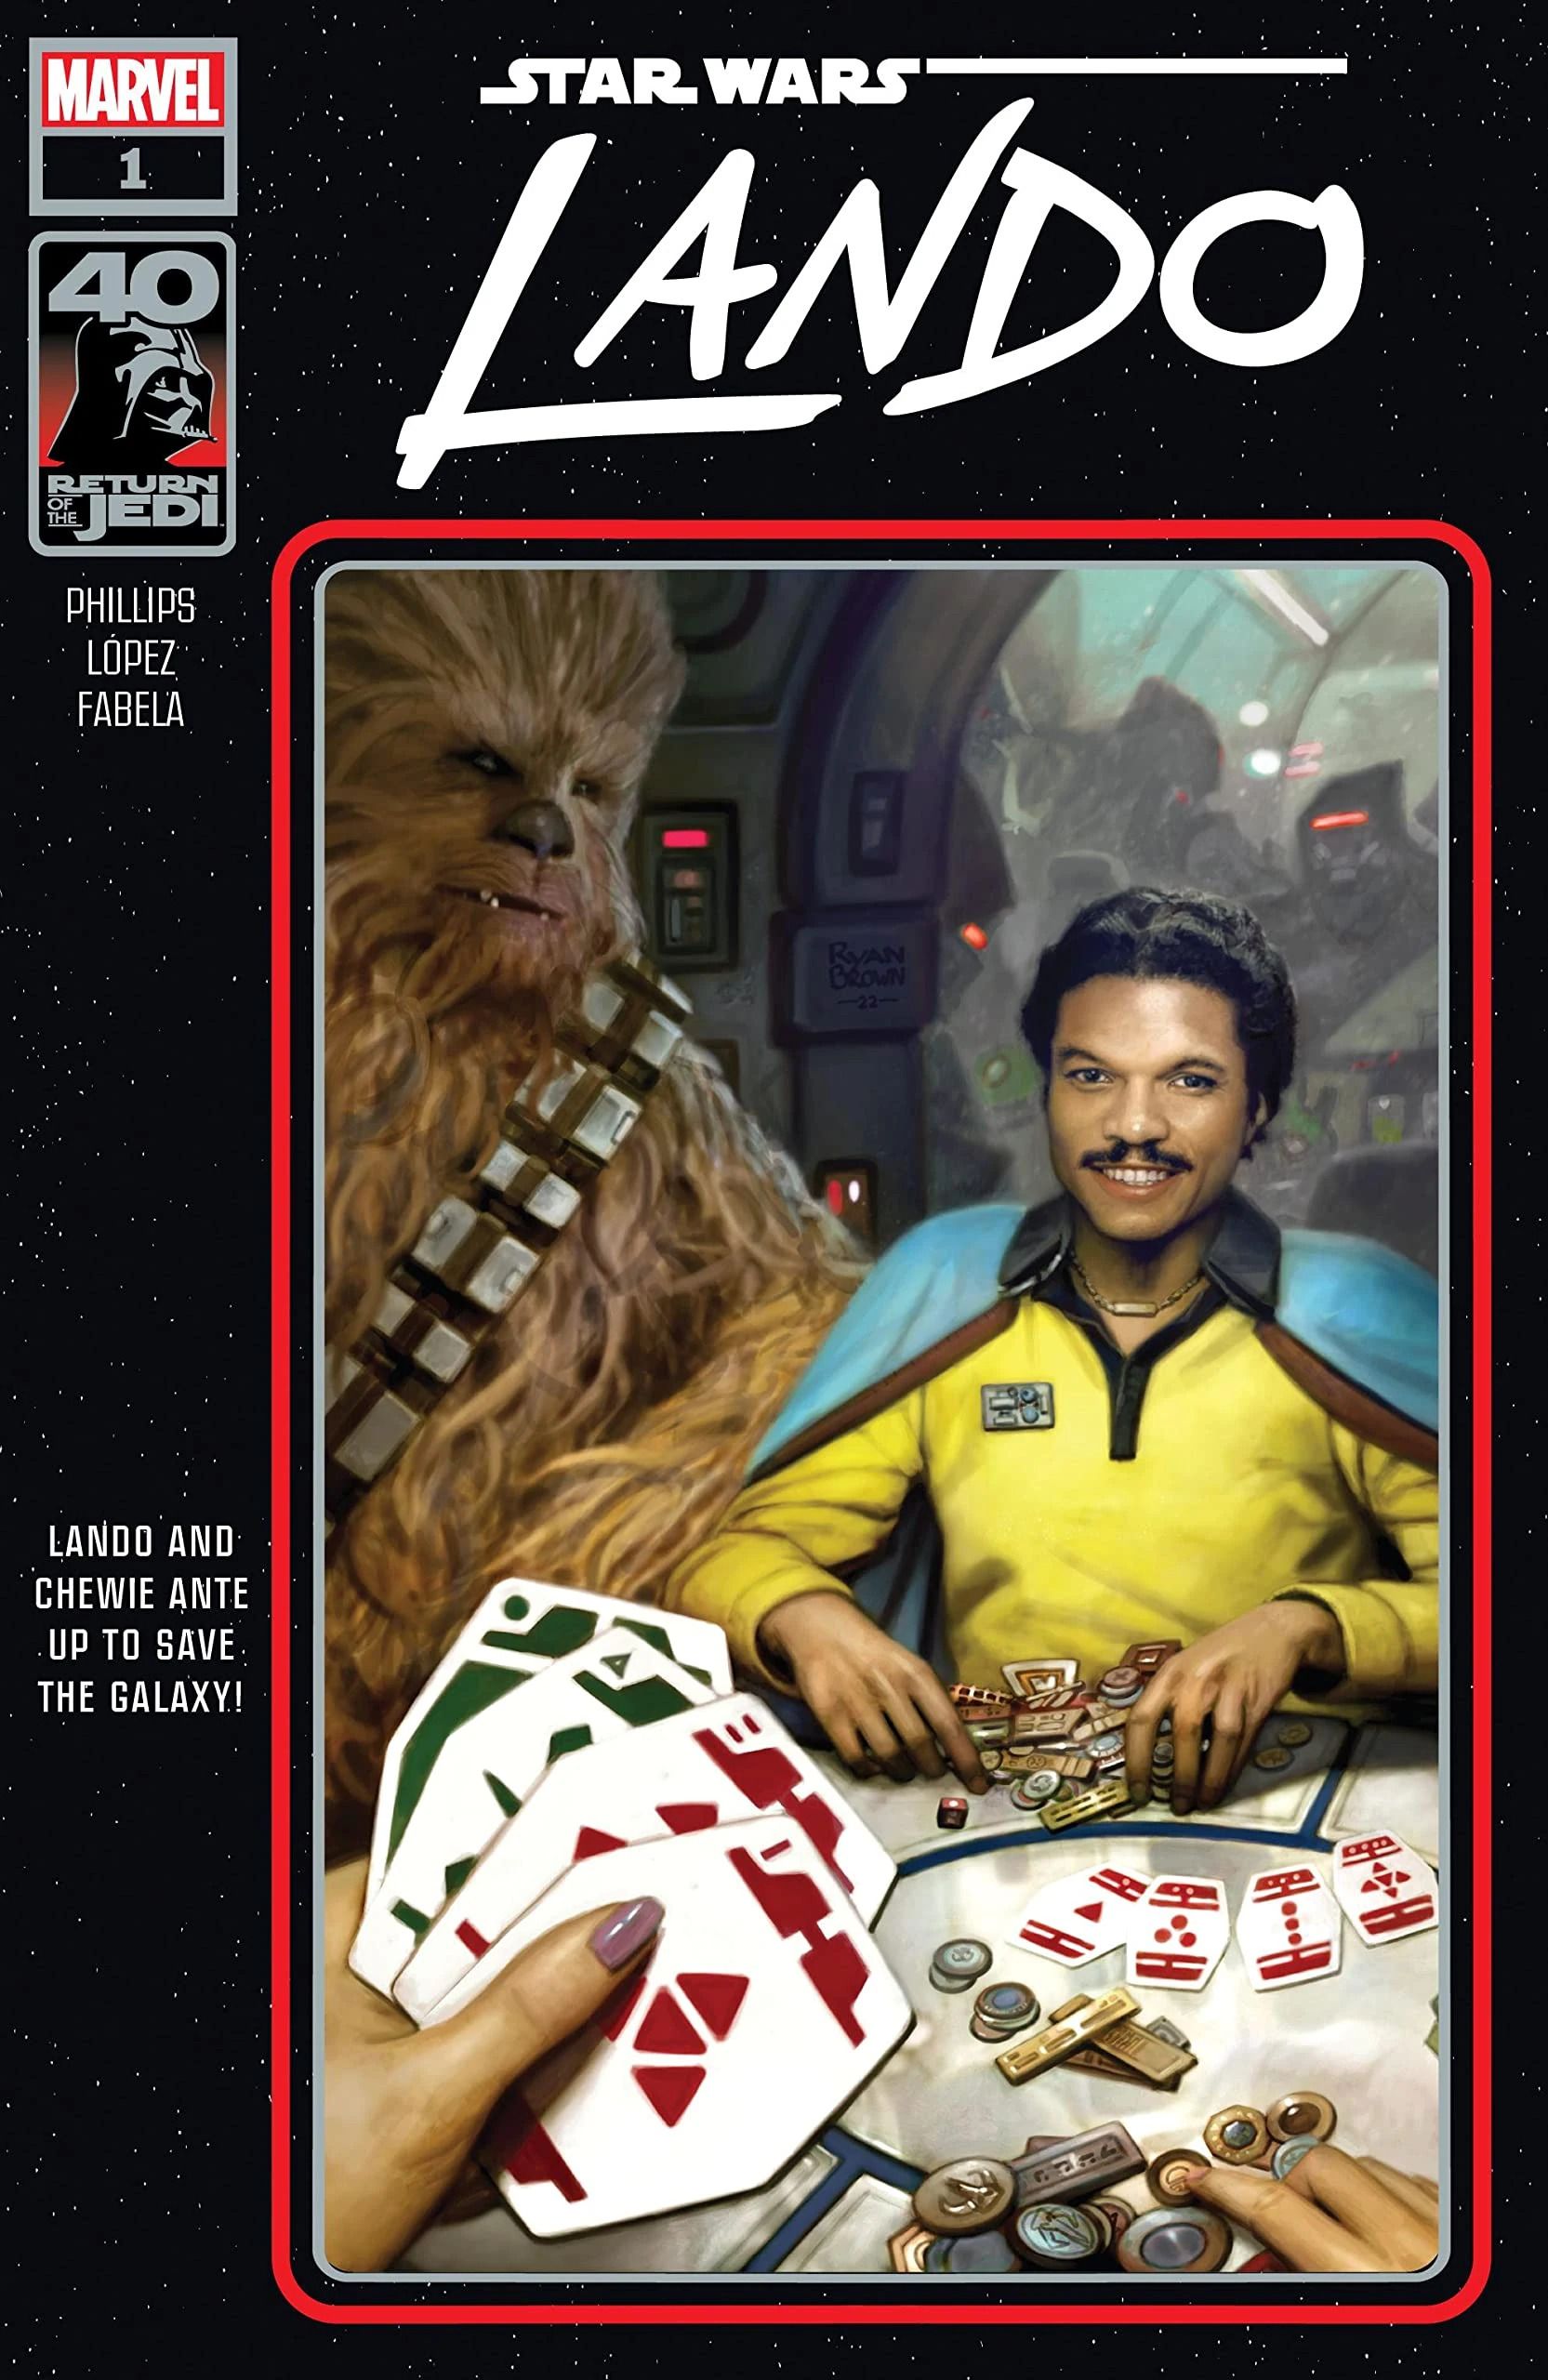 Chewbacca watches as Lando plays Sabacc on the cover of Star Wars Return of the Jedi Lando 1 Cover by Ryan Brown